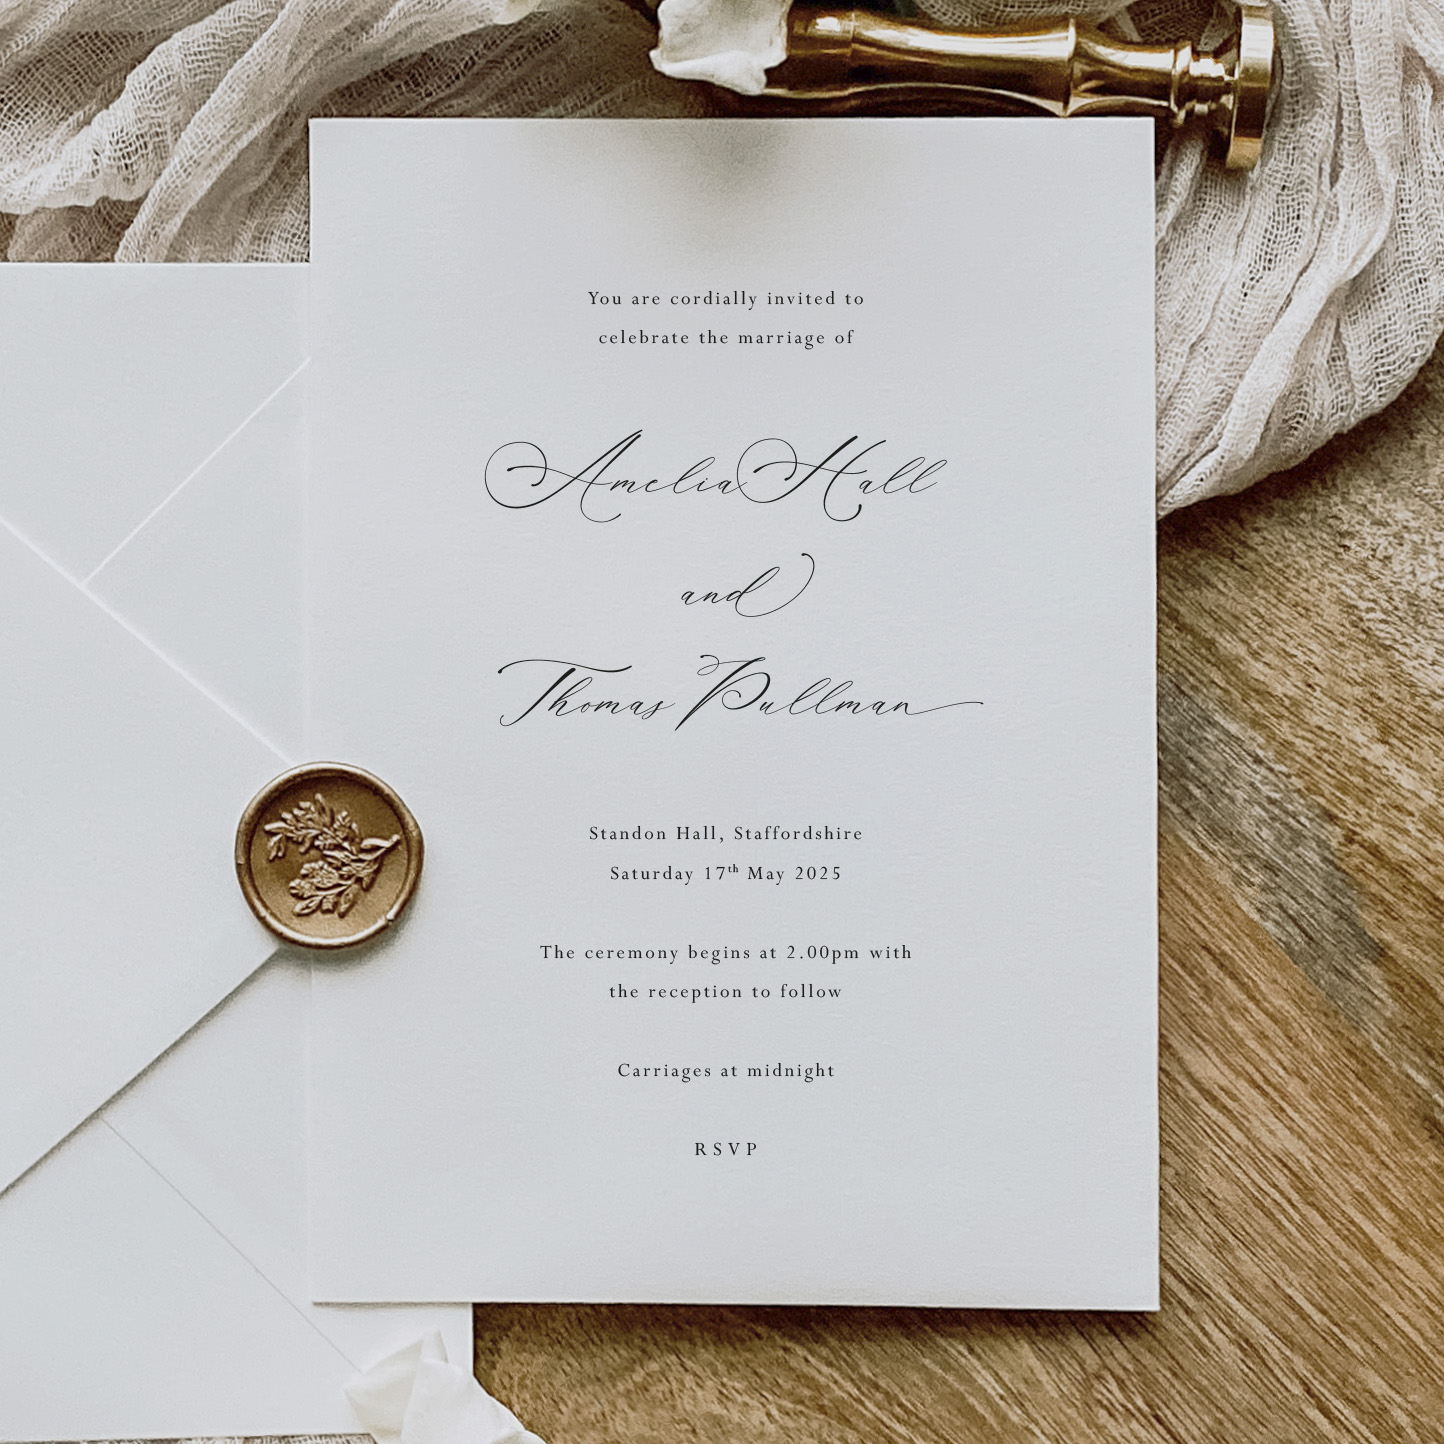 Faith - simple elegant wedding invitation and stationery set shown with wax seal and envelope on wooden background